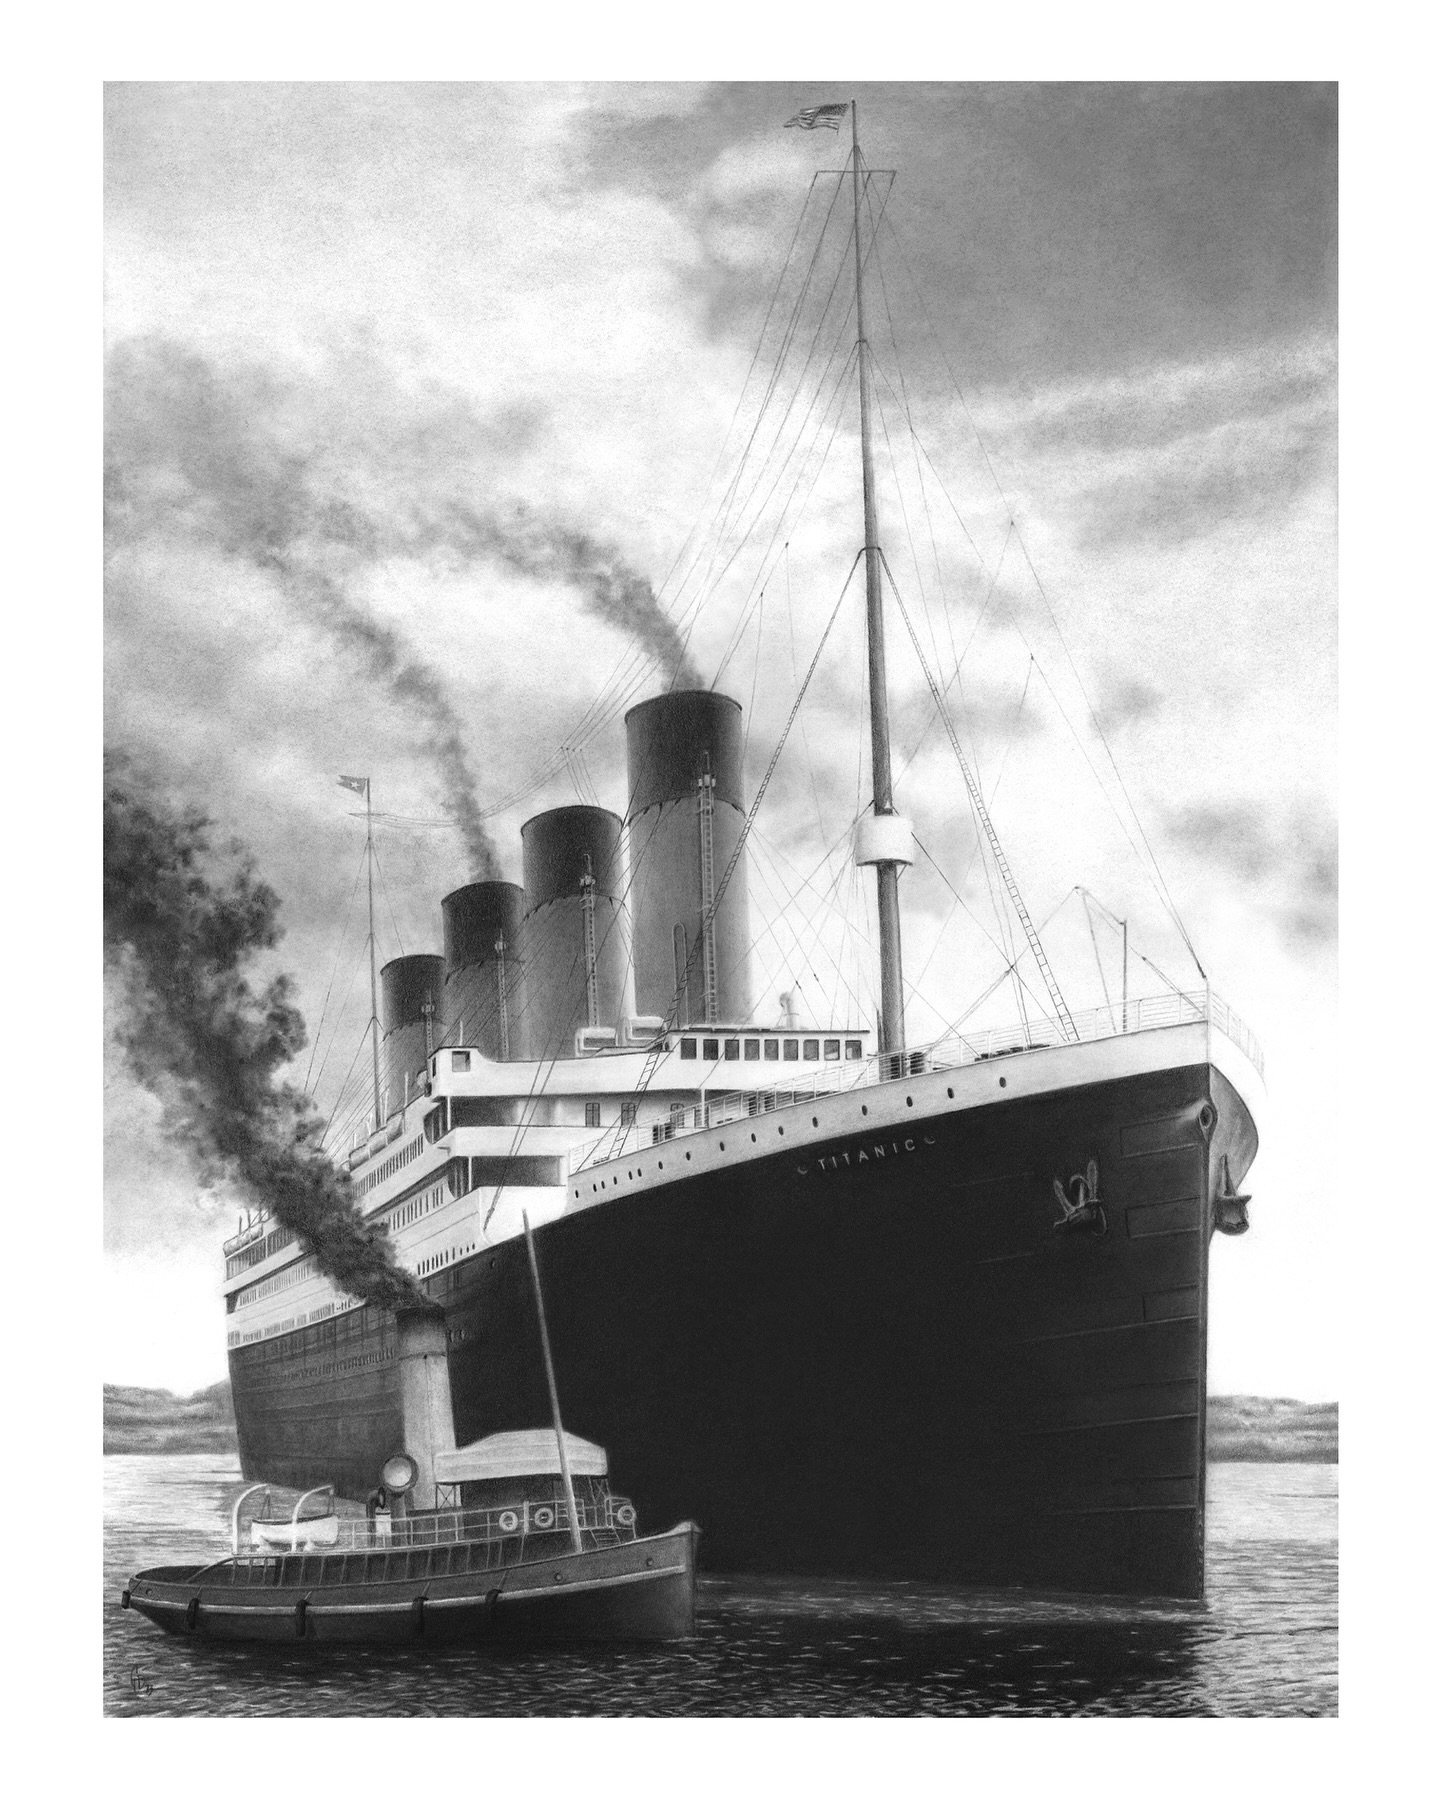 112 years ago today, the R.M.S. Titanic pulled away from Southampton, England and her maiden voyage officially began. This pencil drawing is my interpretation of that moment. Just 5 days later, she would be gone. 

#titanic #pencil #drawing #titanica